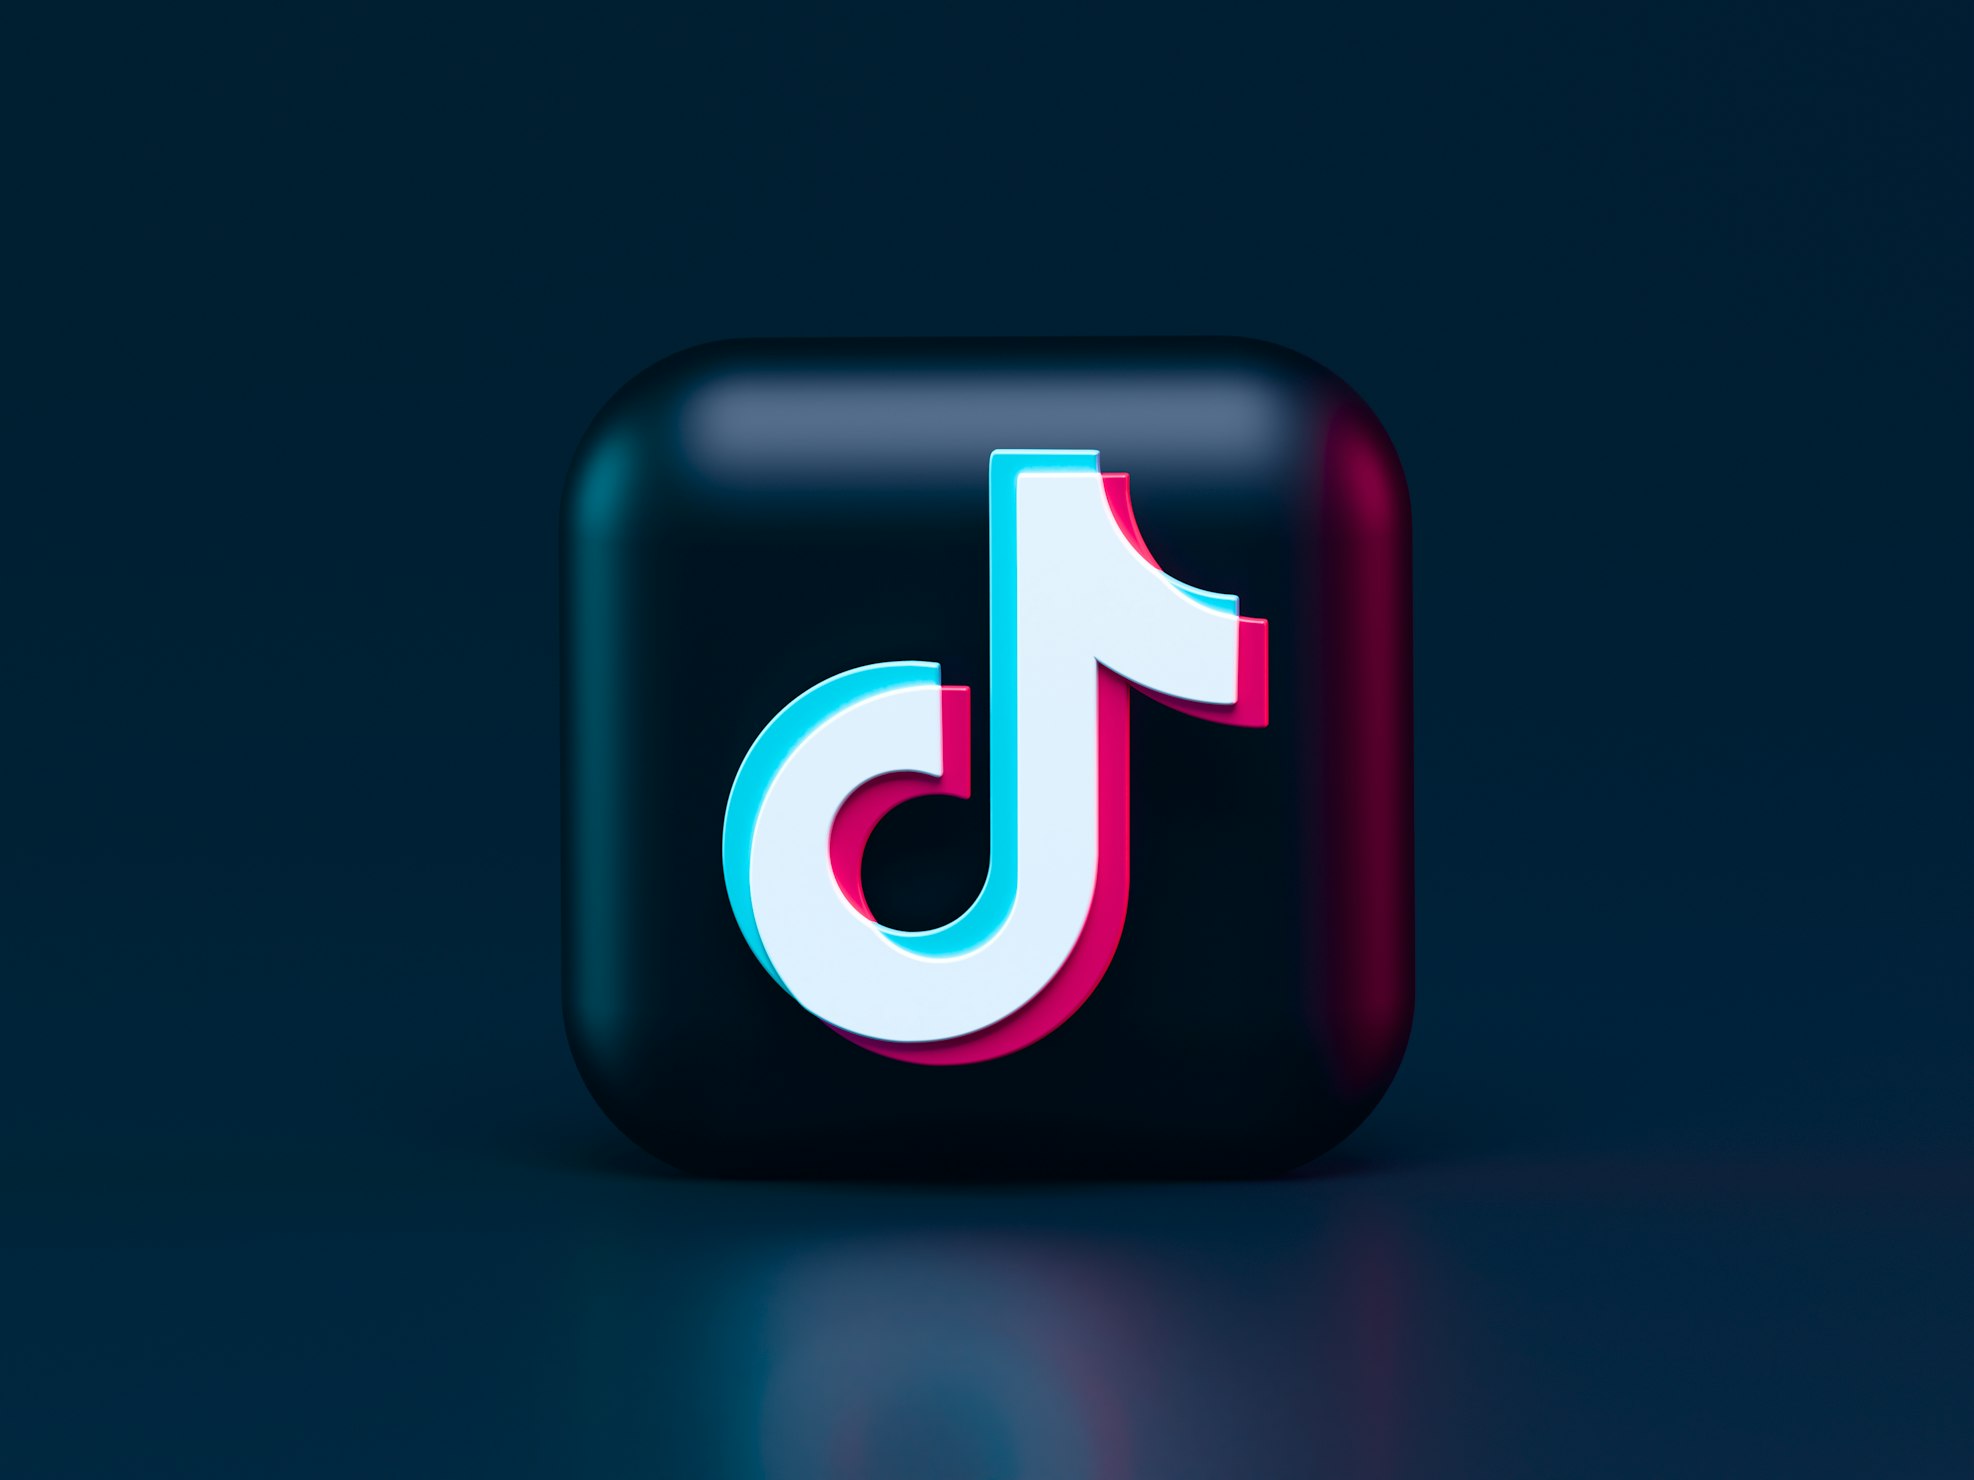 TikTok is needed to make safer products